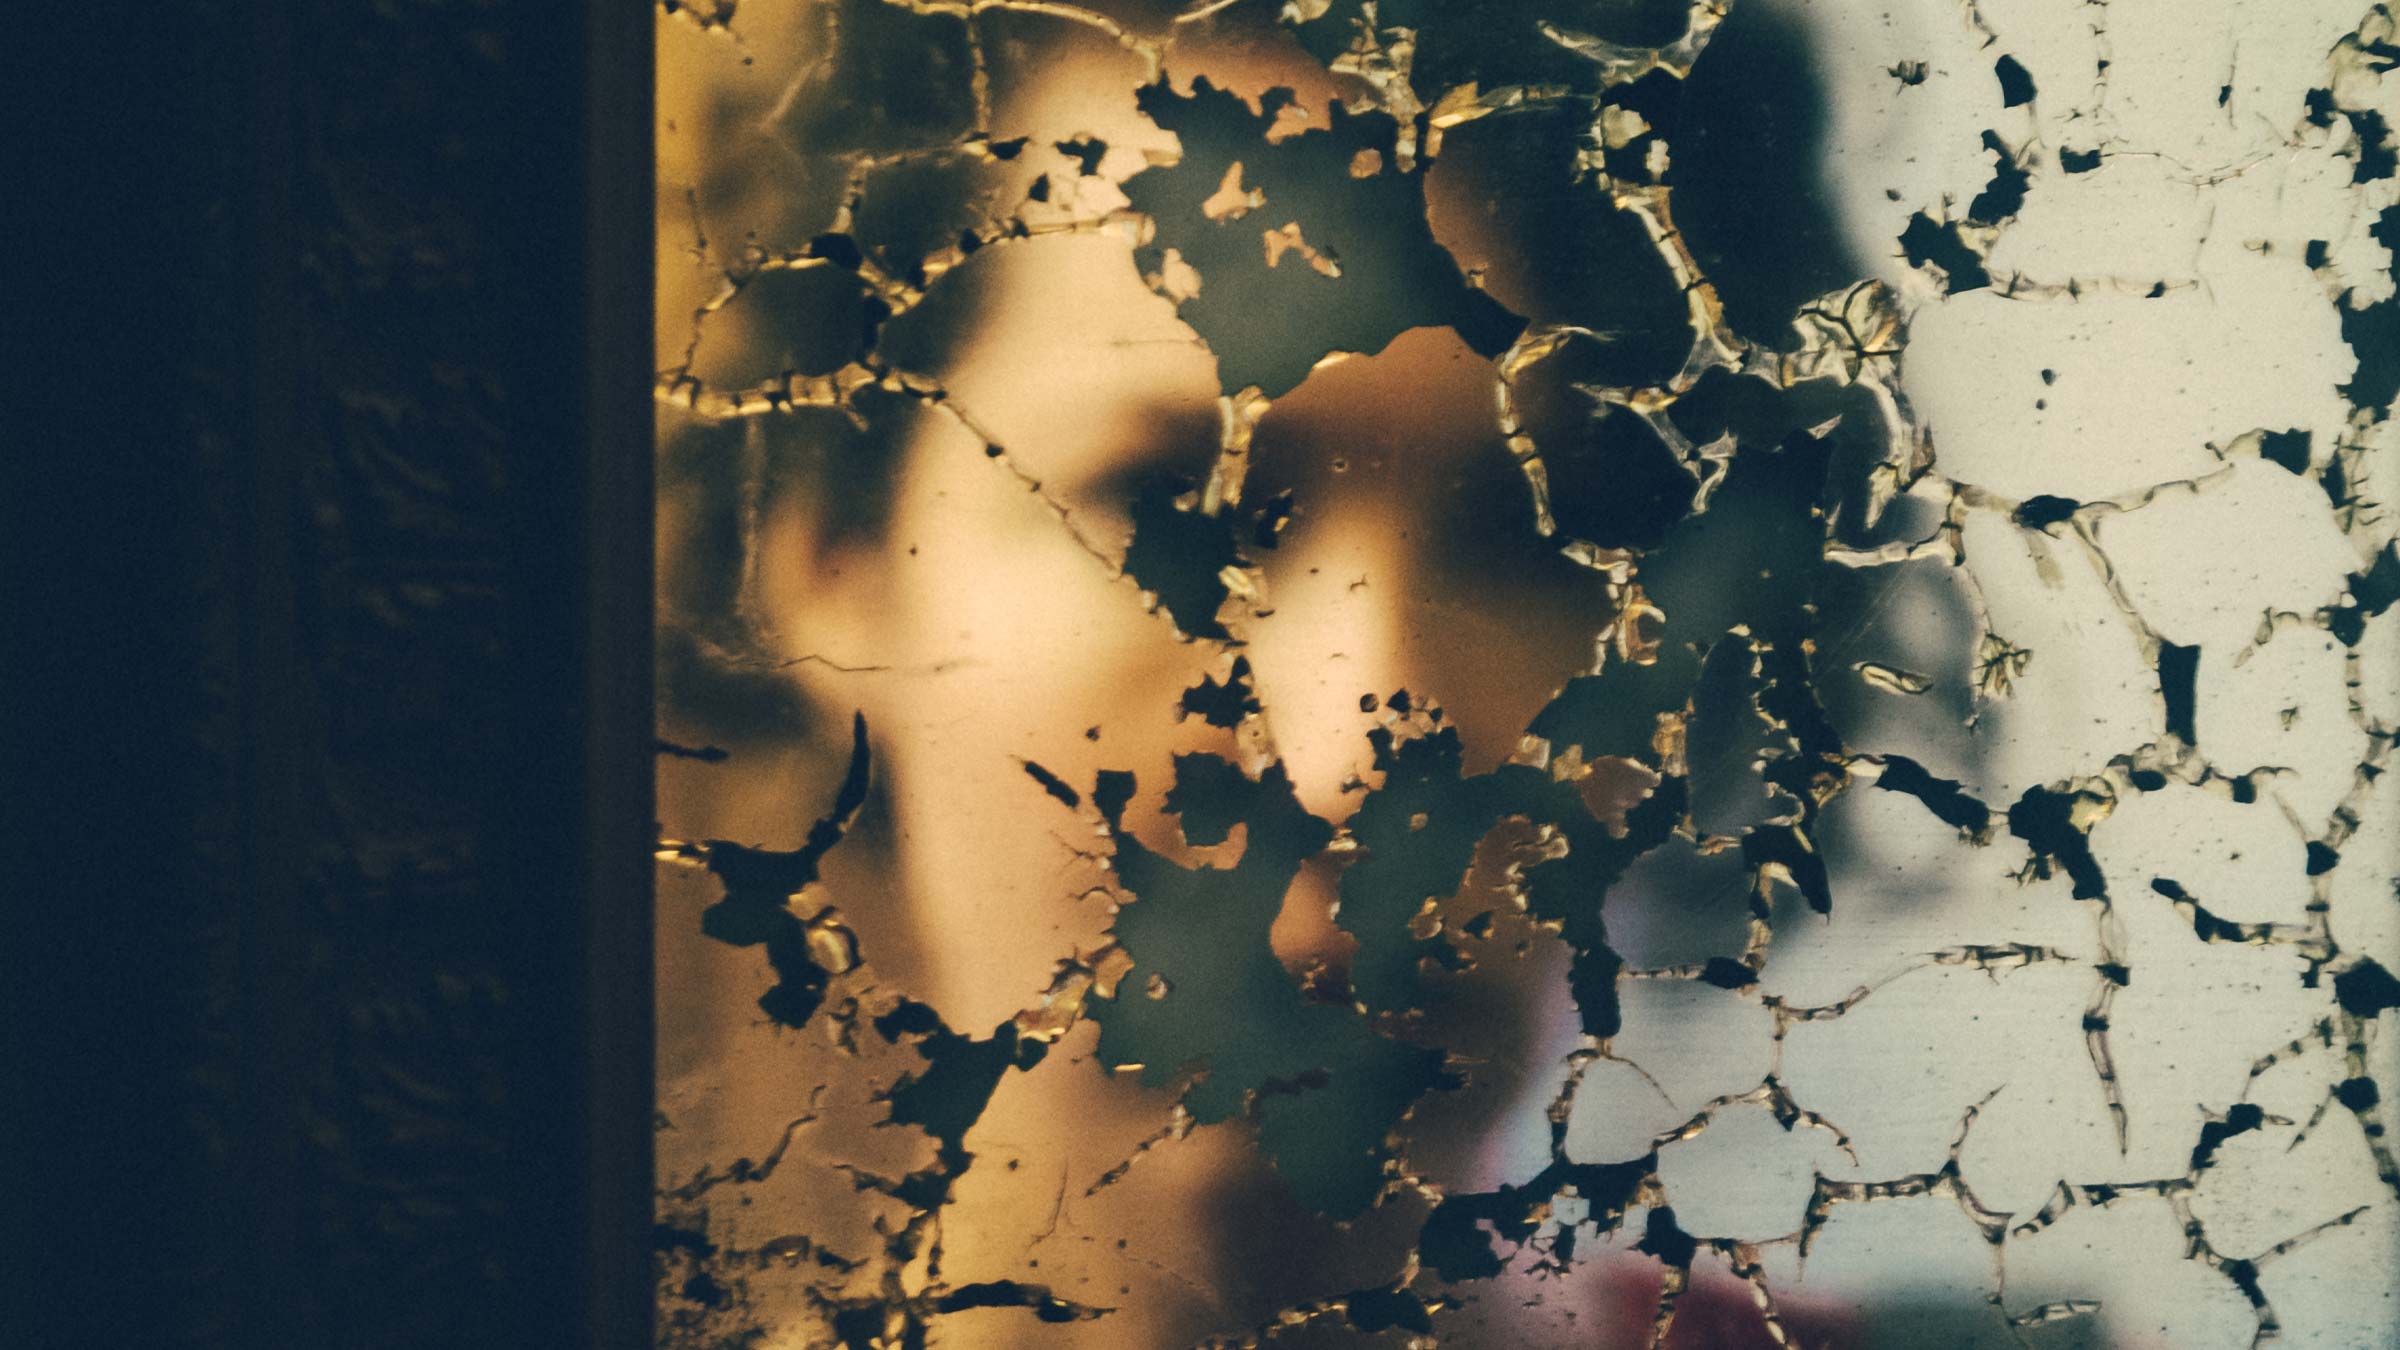 A young woman's reflect in a damaged mirror